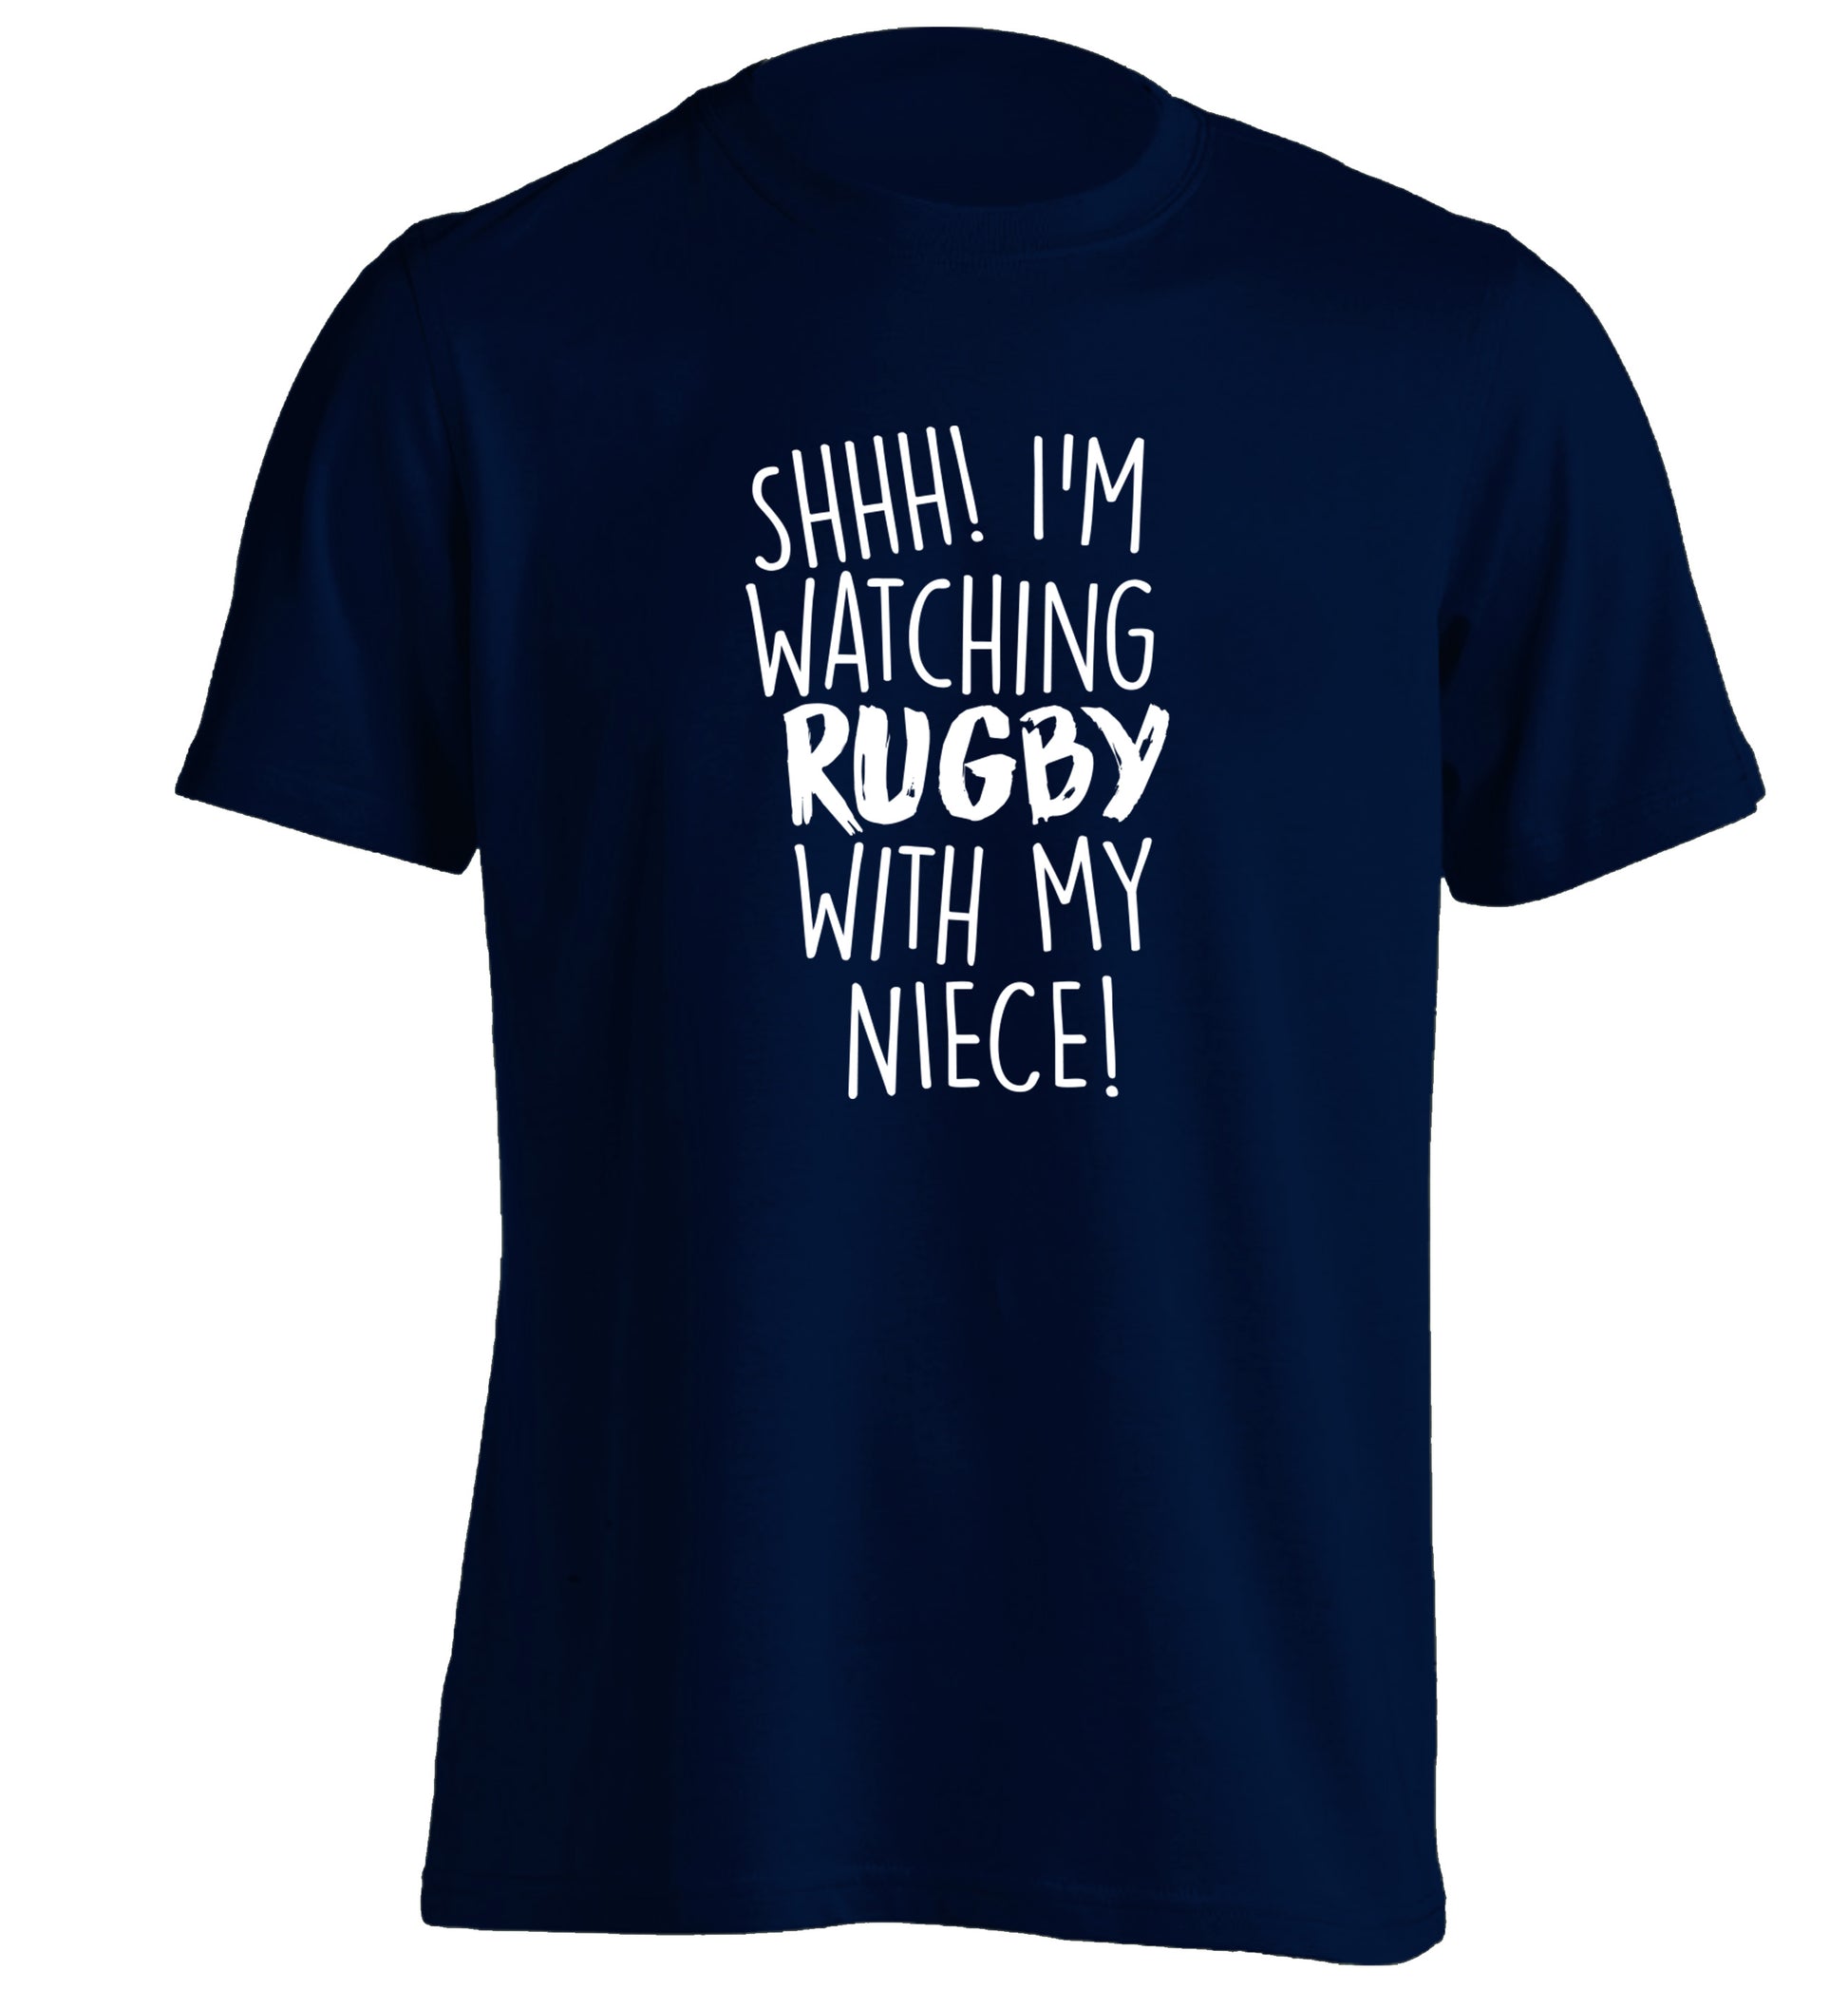 Shh.. I'm watching rugby with my niece adults unisex navy Tshirt 2XL